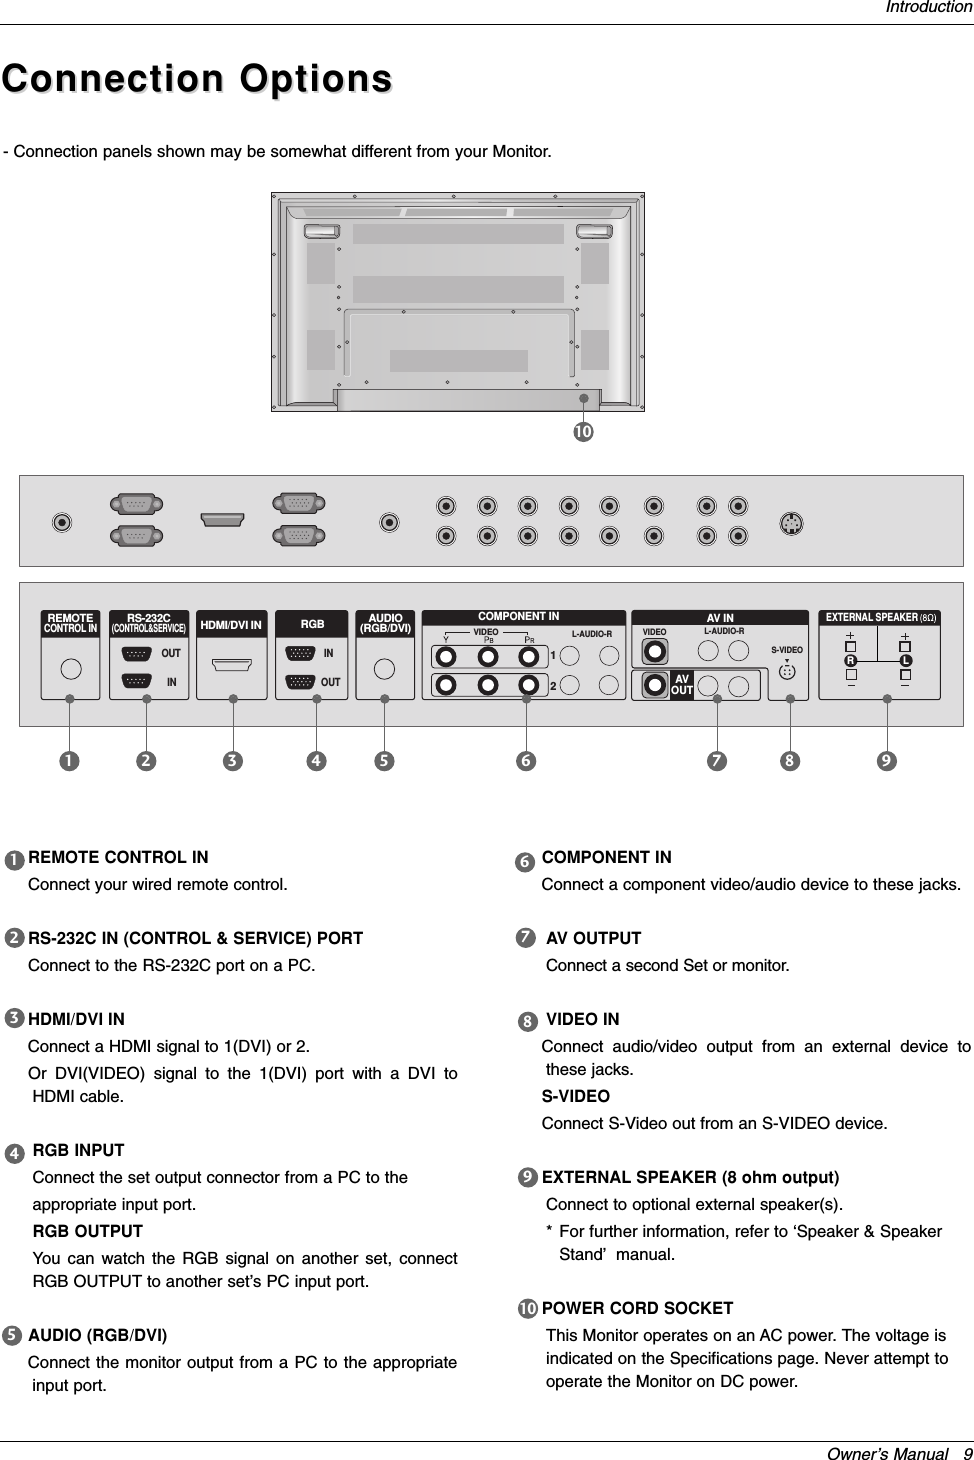 Owner’s Manual   9IntroductionConnection OptionsConnection OptionsREMOTE CONTROL INConnect your wired remote control.RS-232C IN (CONTROL &amp; SERVICE) PORTConnect to the RS-232C port on a PC.HDMI/DVI INConnect a HDMI signal to 1(DVI) or 2.Or DVI(VIDEO) signal to the 1(DVI) port with a DVI toHDMI cable.RGB INPUTConnect the set output connector from a PC to the appropriate input port.RGB OUTPUTYou can watch the RGB signal on another set, connectRGB OUTPUT to another set’s PC input port.AUDIO (RGB/DVI)Connect the monitor output from a PC to the appropriateinput port.COMPONENT INConnect a component video/audio device to these jacks.AV OUTPUT Connect a second Set or monitor.VIDEO IN Connect audio/video output from an external device tothese jacks.S-VIDEO Connect S-Video out from an S-VIDEO device.EXTERNAL SPEAKER (8 ohm output)Connect to optional external speaker(s).* For further information, refer to ‘Speaker &amp; SpeakerStand’manual.POWER CORD SOCKETThis Monitor operates on an AC power. The voltage isindicated on the Specifications page. Never attempt tooperate the Monitor on DC power.17234568910- Connection panels shown may be somewhat different from your Monitor.COMPONENT INOUTINREMOTECONTROL INHDMI/DVI INRS-232C(CONTROL&amp;SERVICE)INOUTRGB12VIDEOAUDIO(RGB/DVI)L-AUDIO-RVIDEOAVOUTAV INL-AUDIO-RS-VIDEO    EXTERNAL SPEAKERRL1 2 3 4 6 7 8 9510